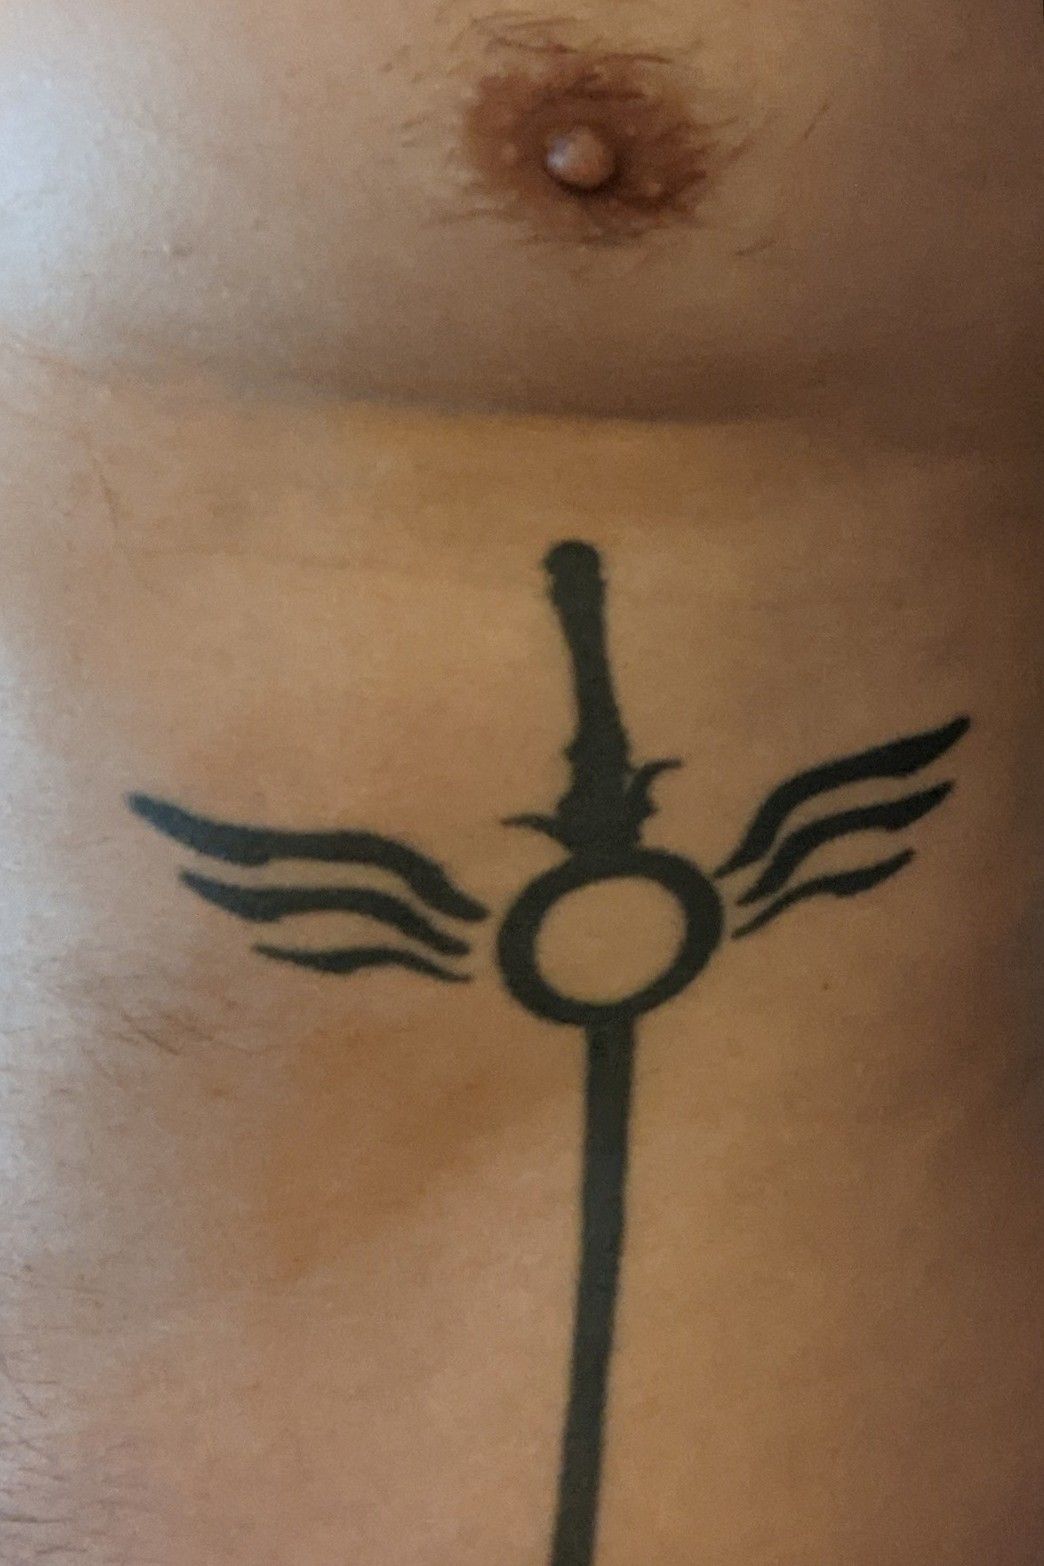 Devil May Cry, Dante Tattoo, ink  Tattoos with meaning, Geek tattoo, Back  tattoo